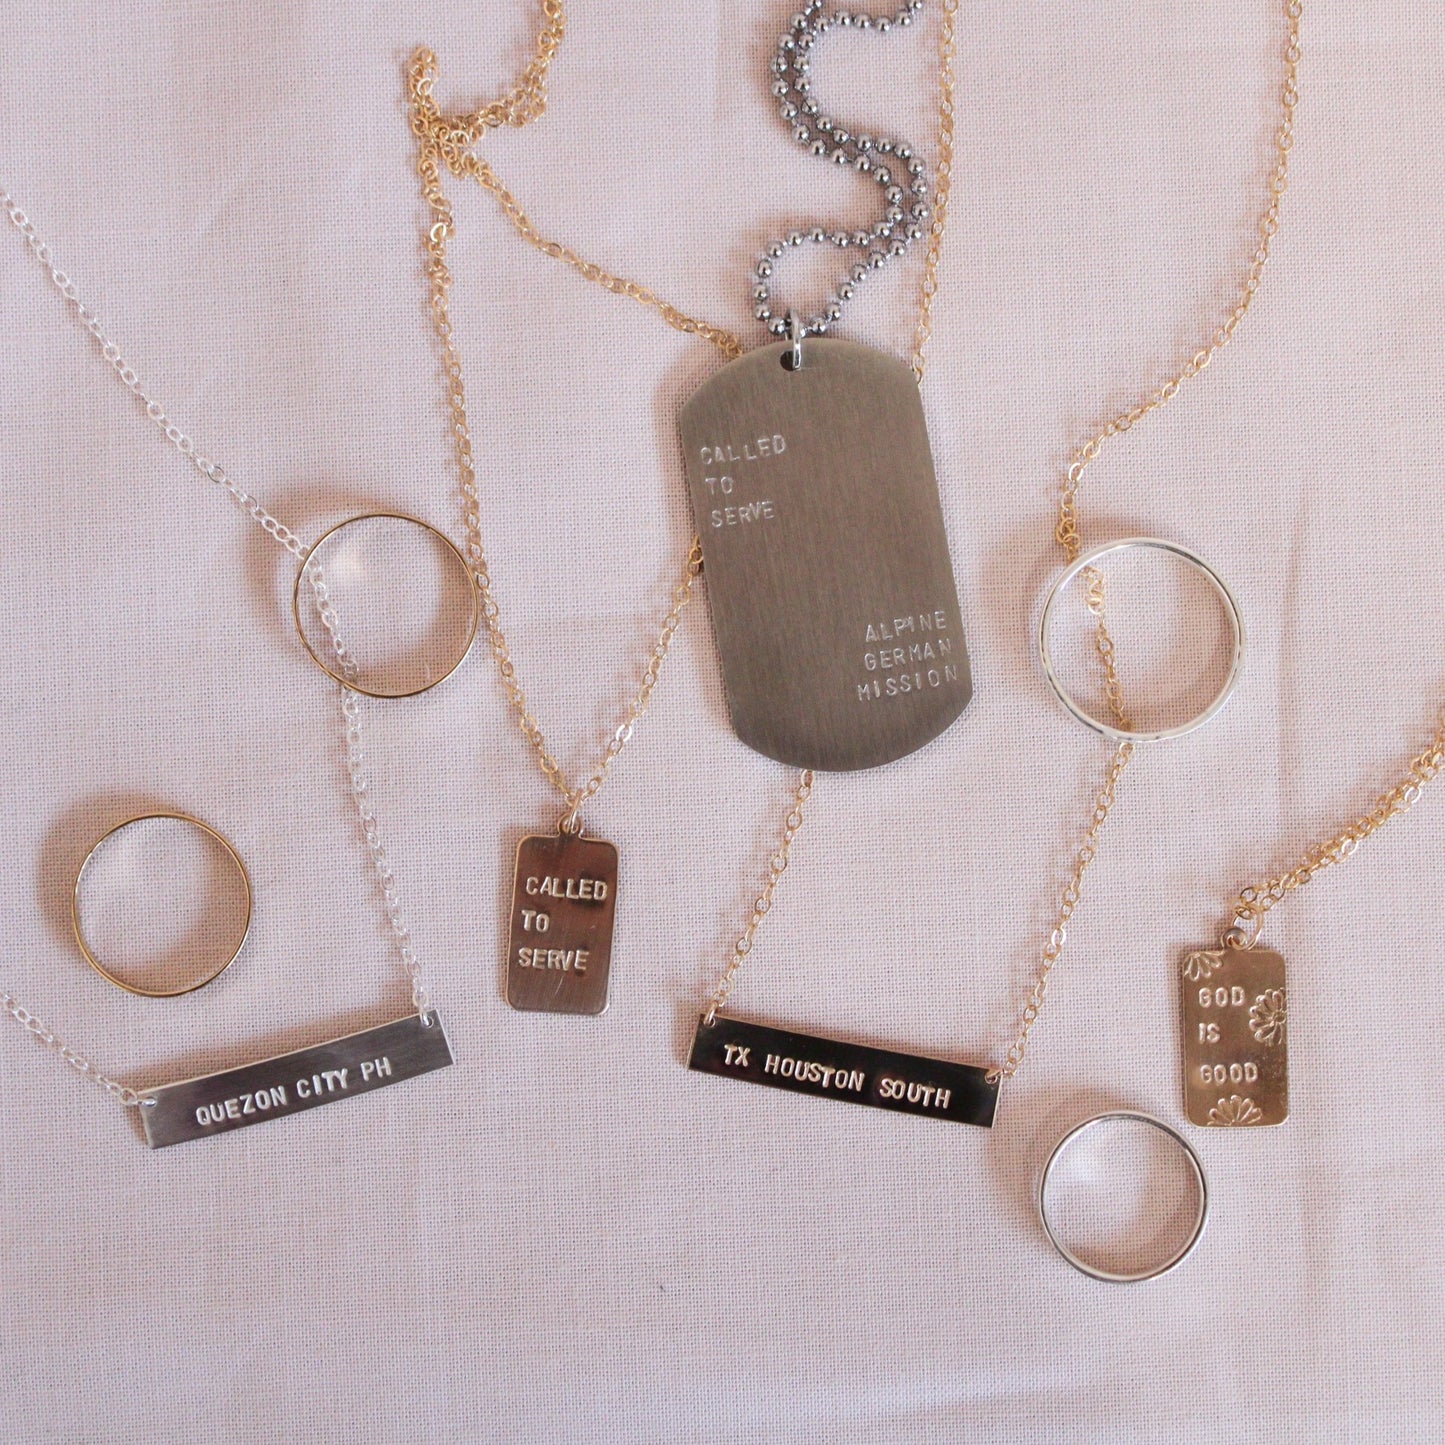 Called To Serve - Mission Necklace